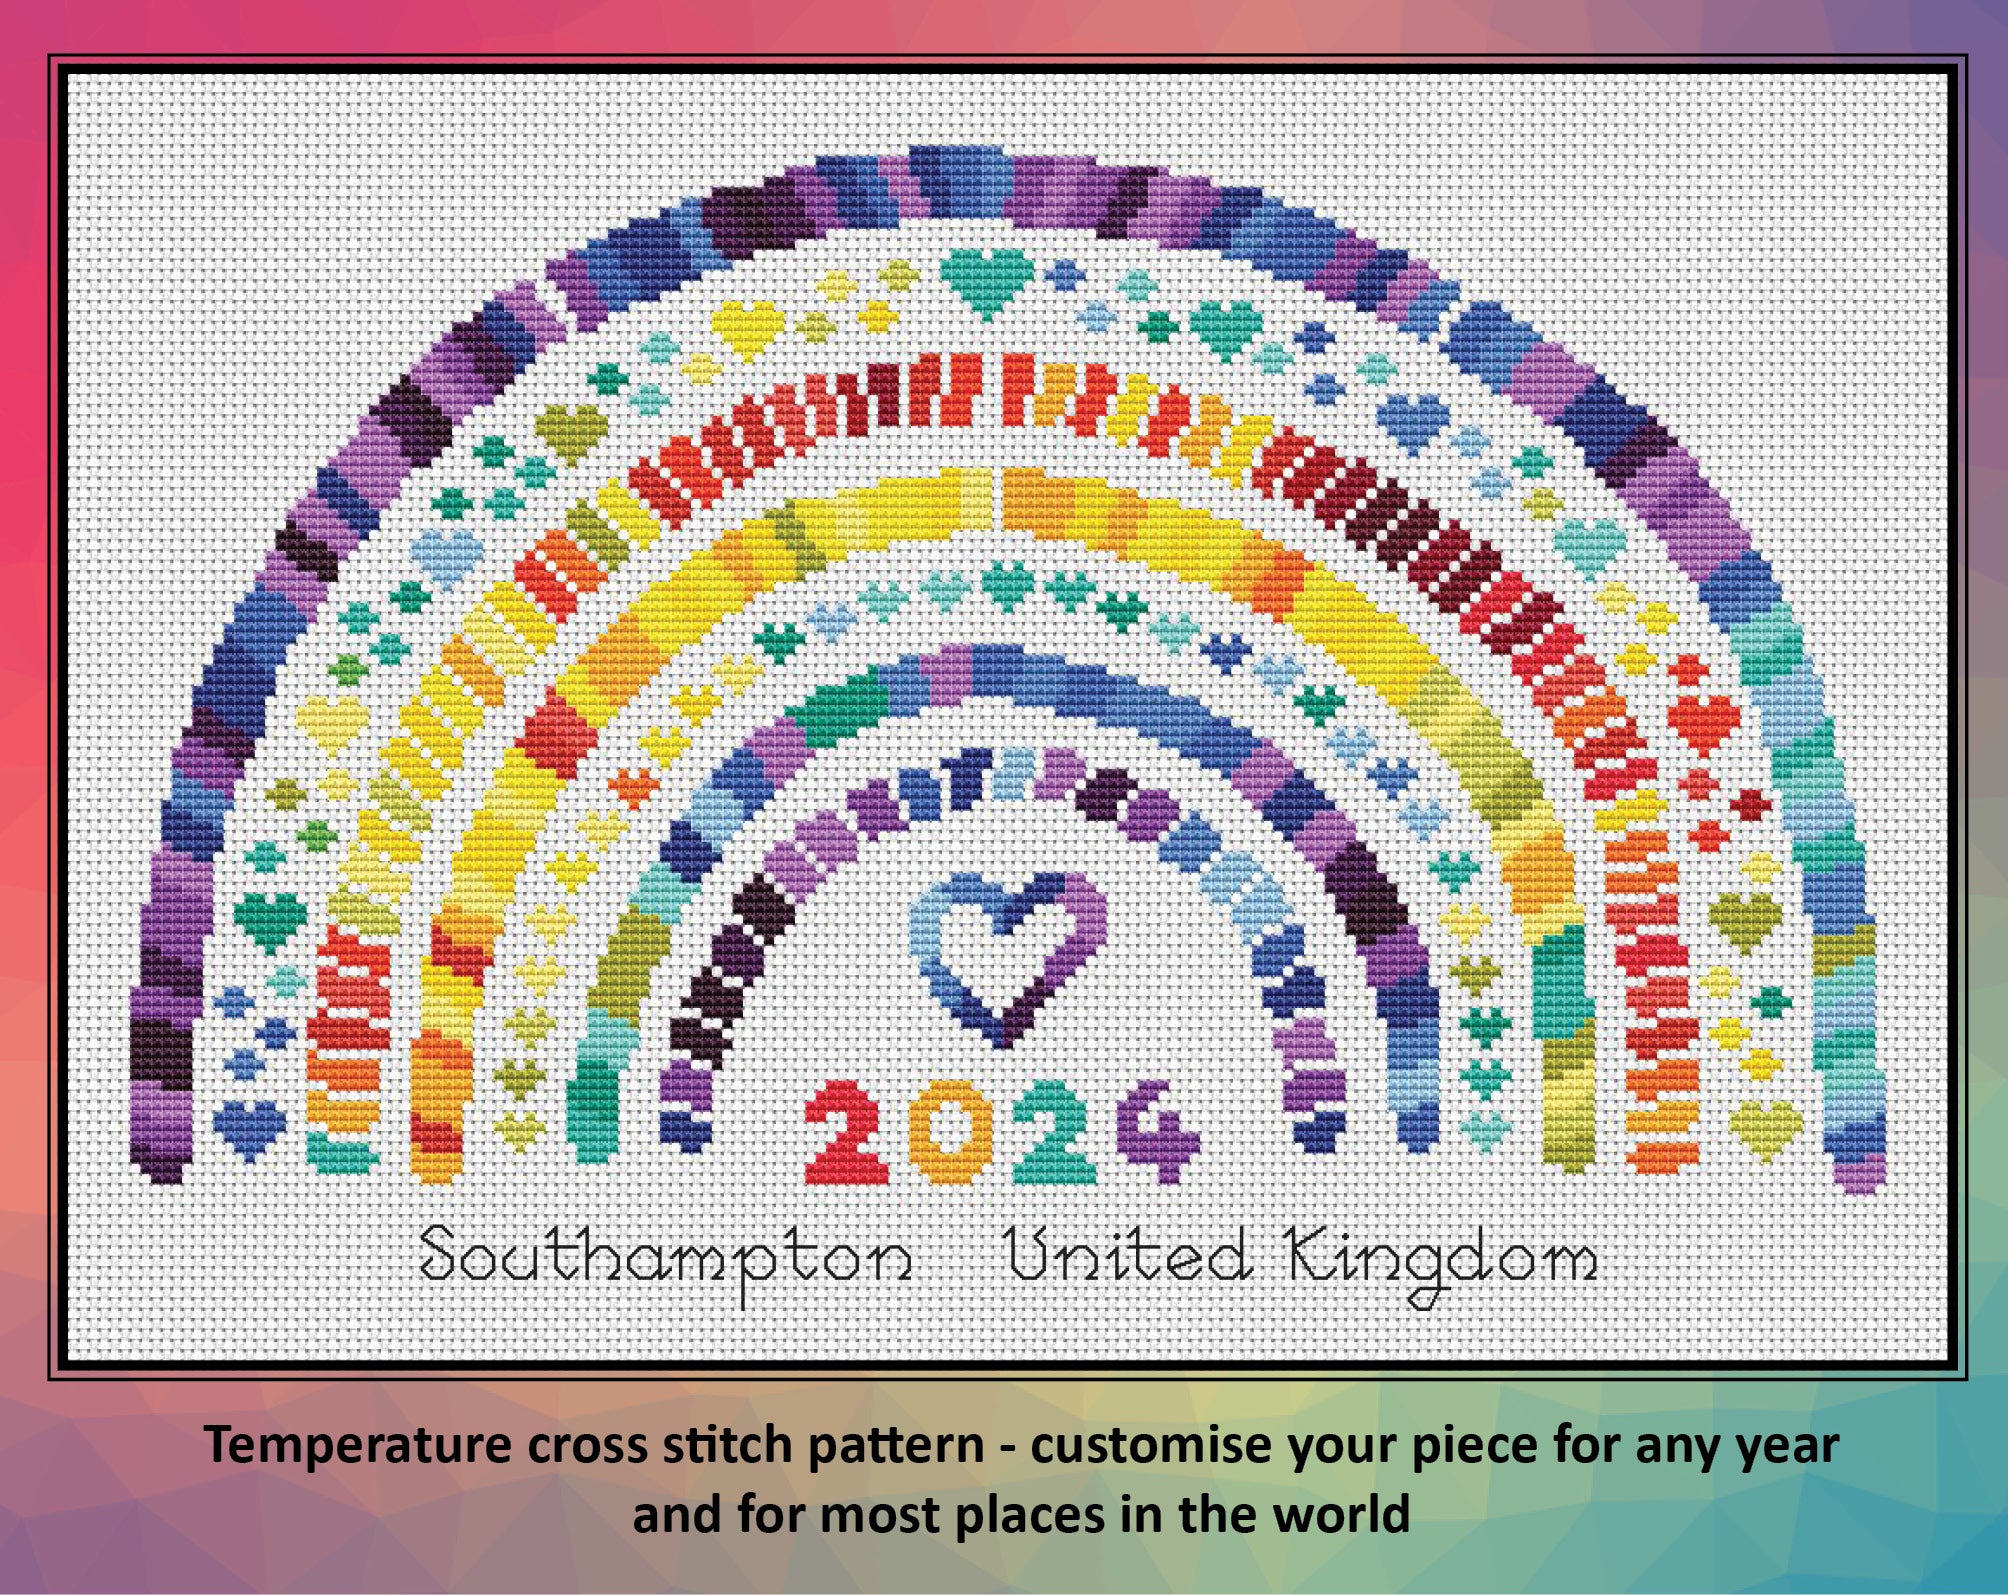 Temperature Rainbow cross stitch pattern - customise your piece for any year and for most places in the world. Image shows maximum temperatures pattern on white fabric.